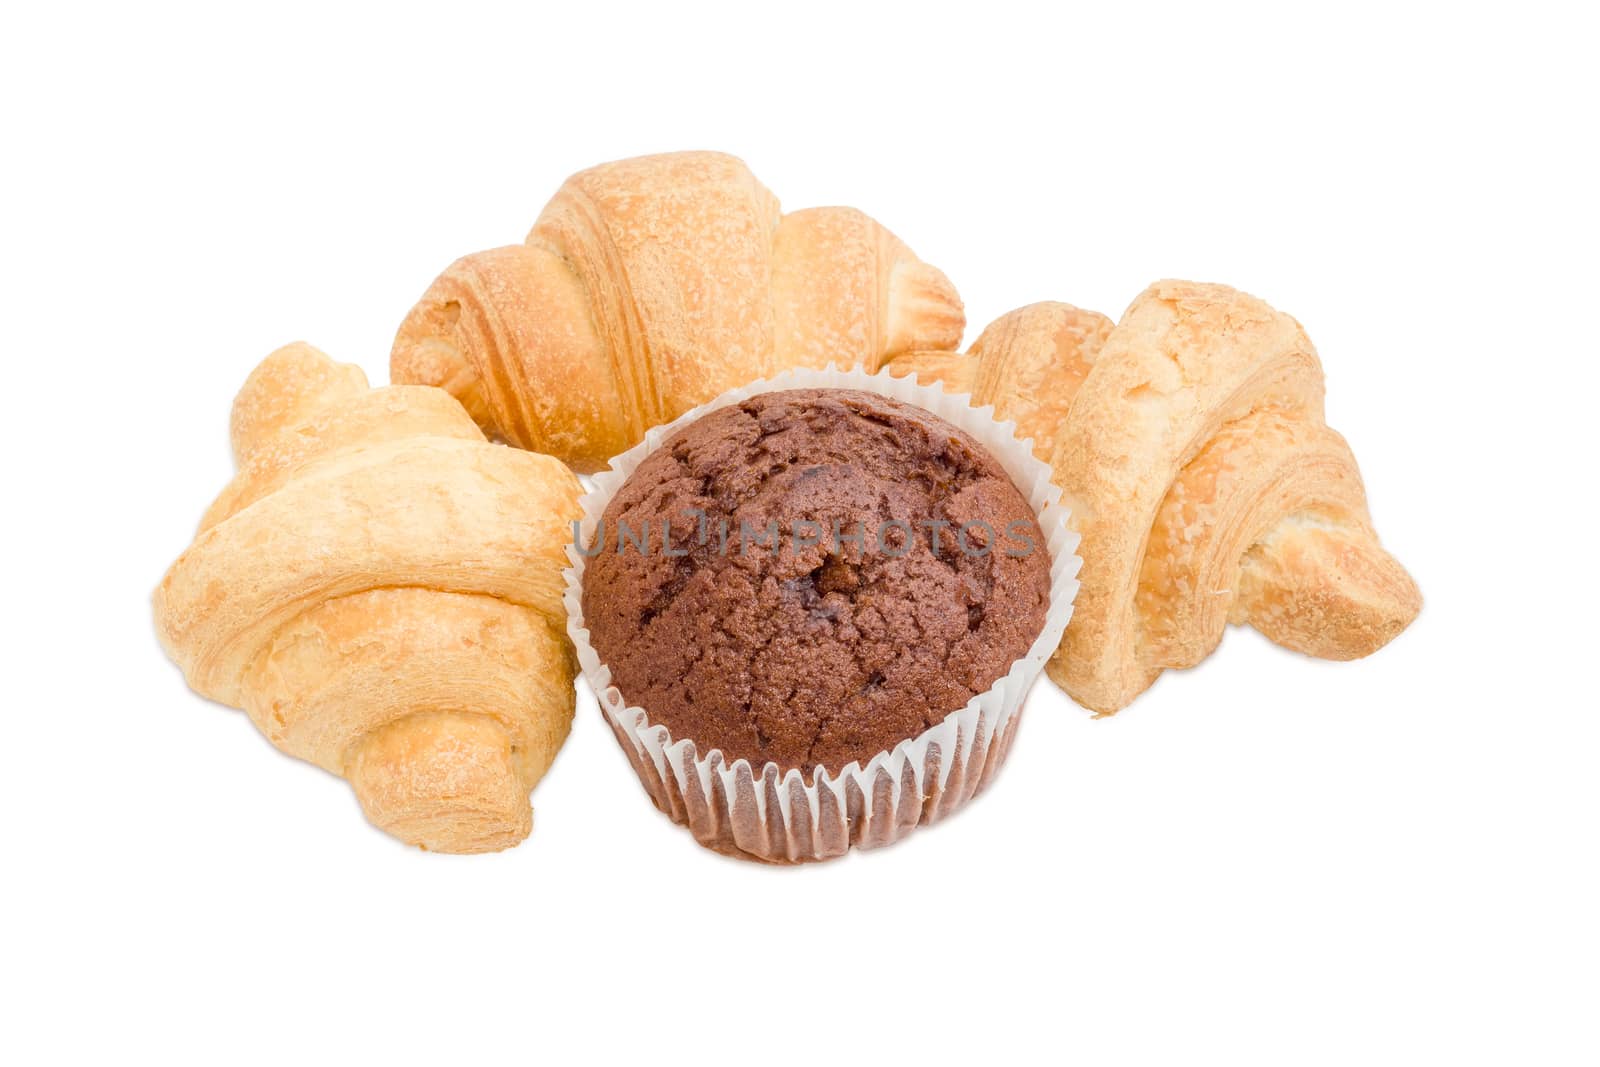 Three small croissant and chocolate muffin on a light background by anmbph